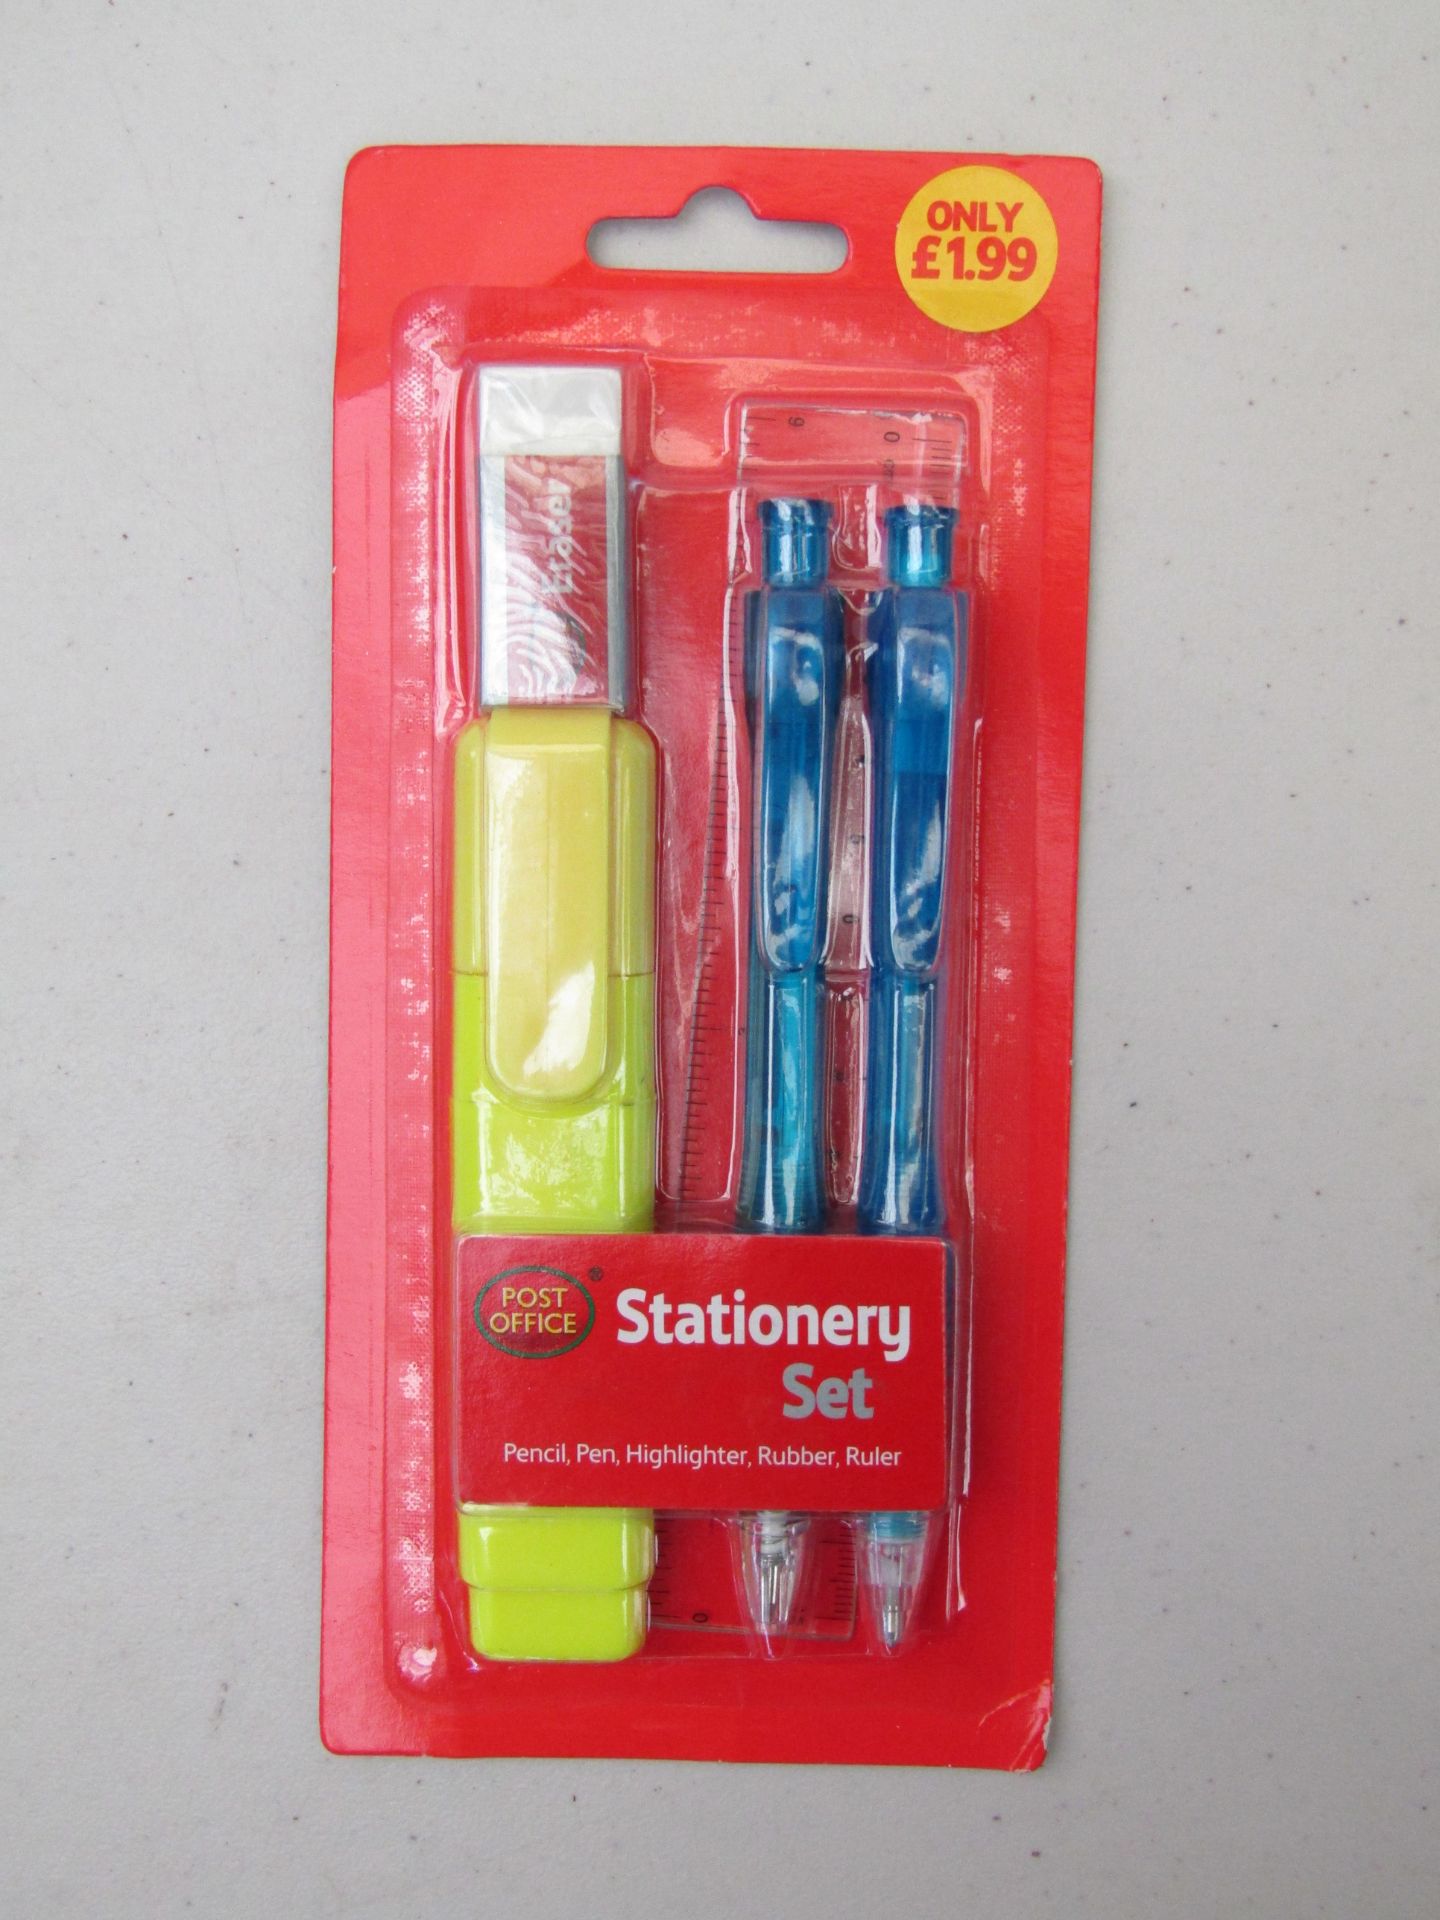 12x Post Office Stationary Sets. Each set contains a pencil, pen, highlighter, rubber and ruler.